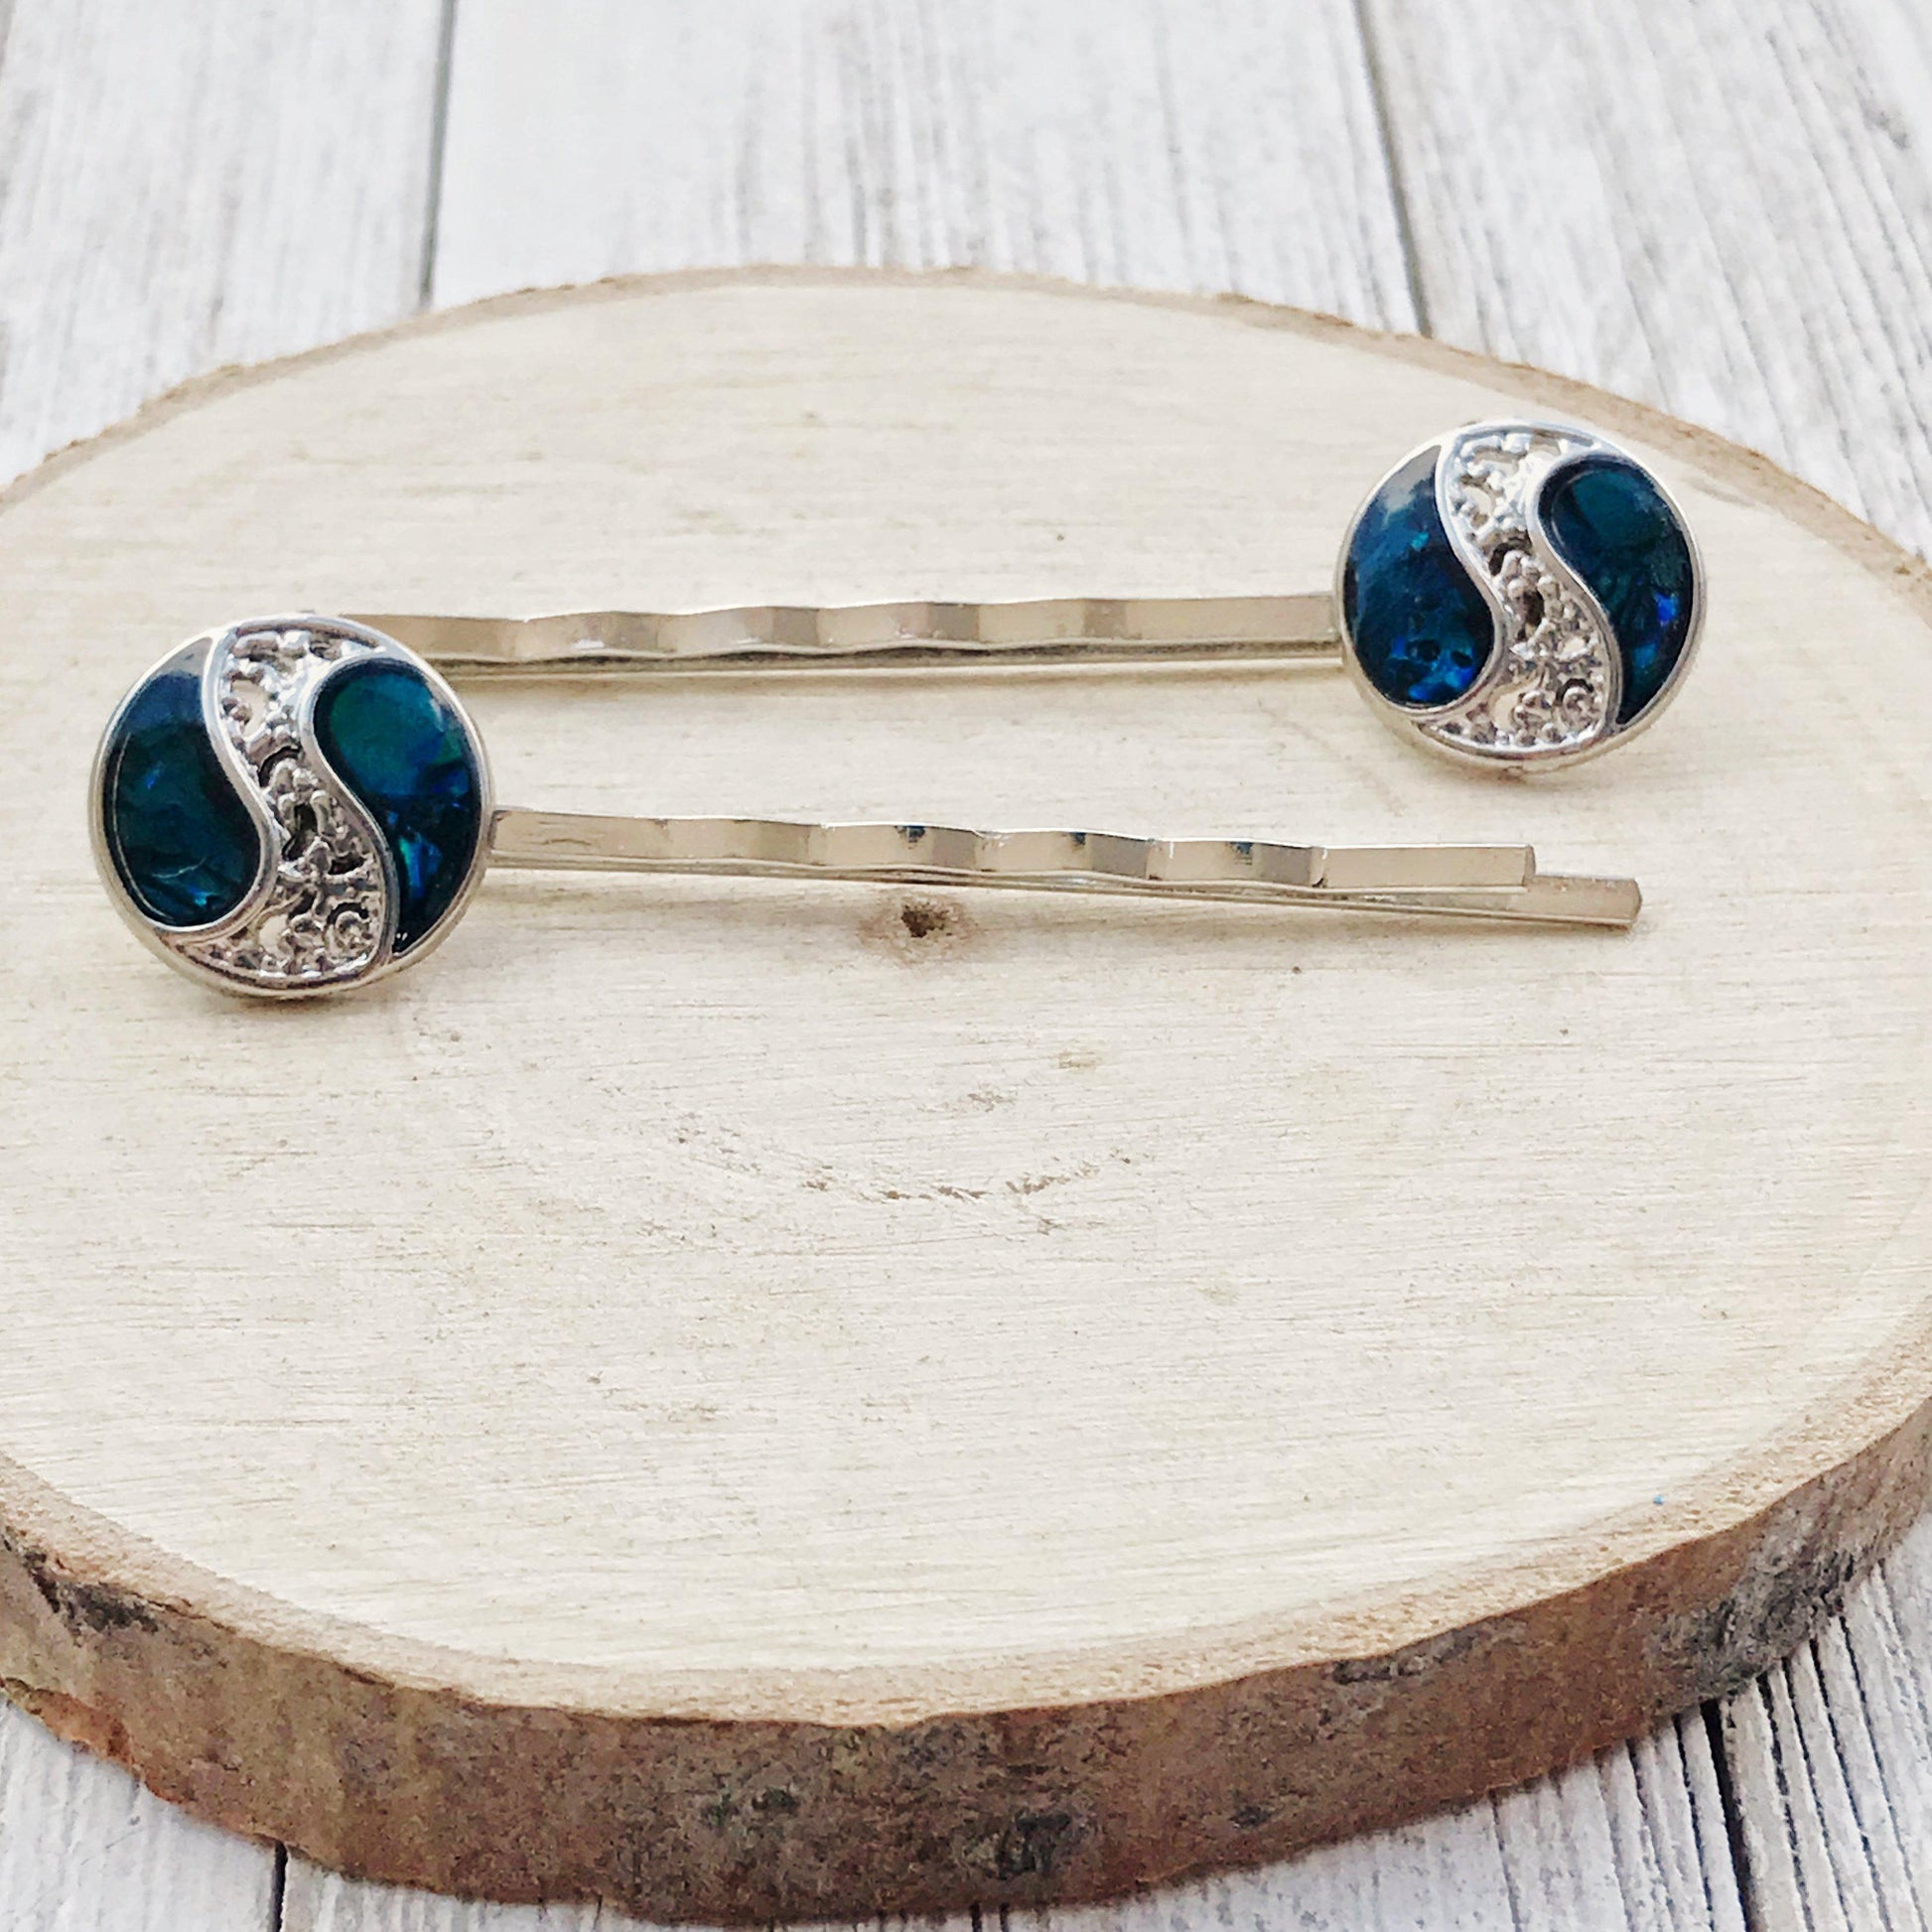 Yin Yang Wave Jewelry Hair Pins for Women - Stylish & Symbolic Accessories